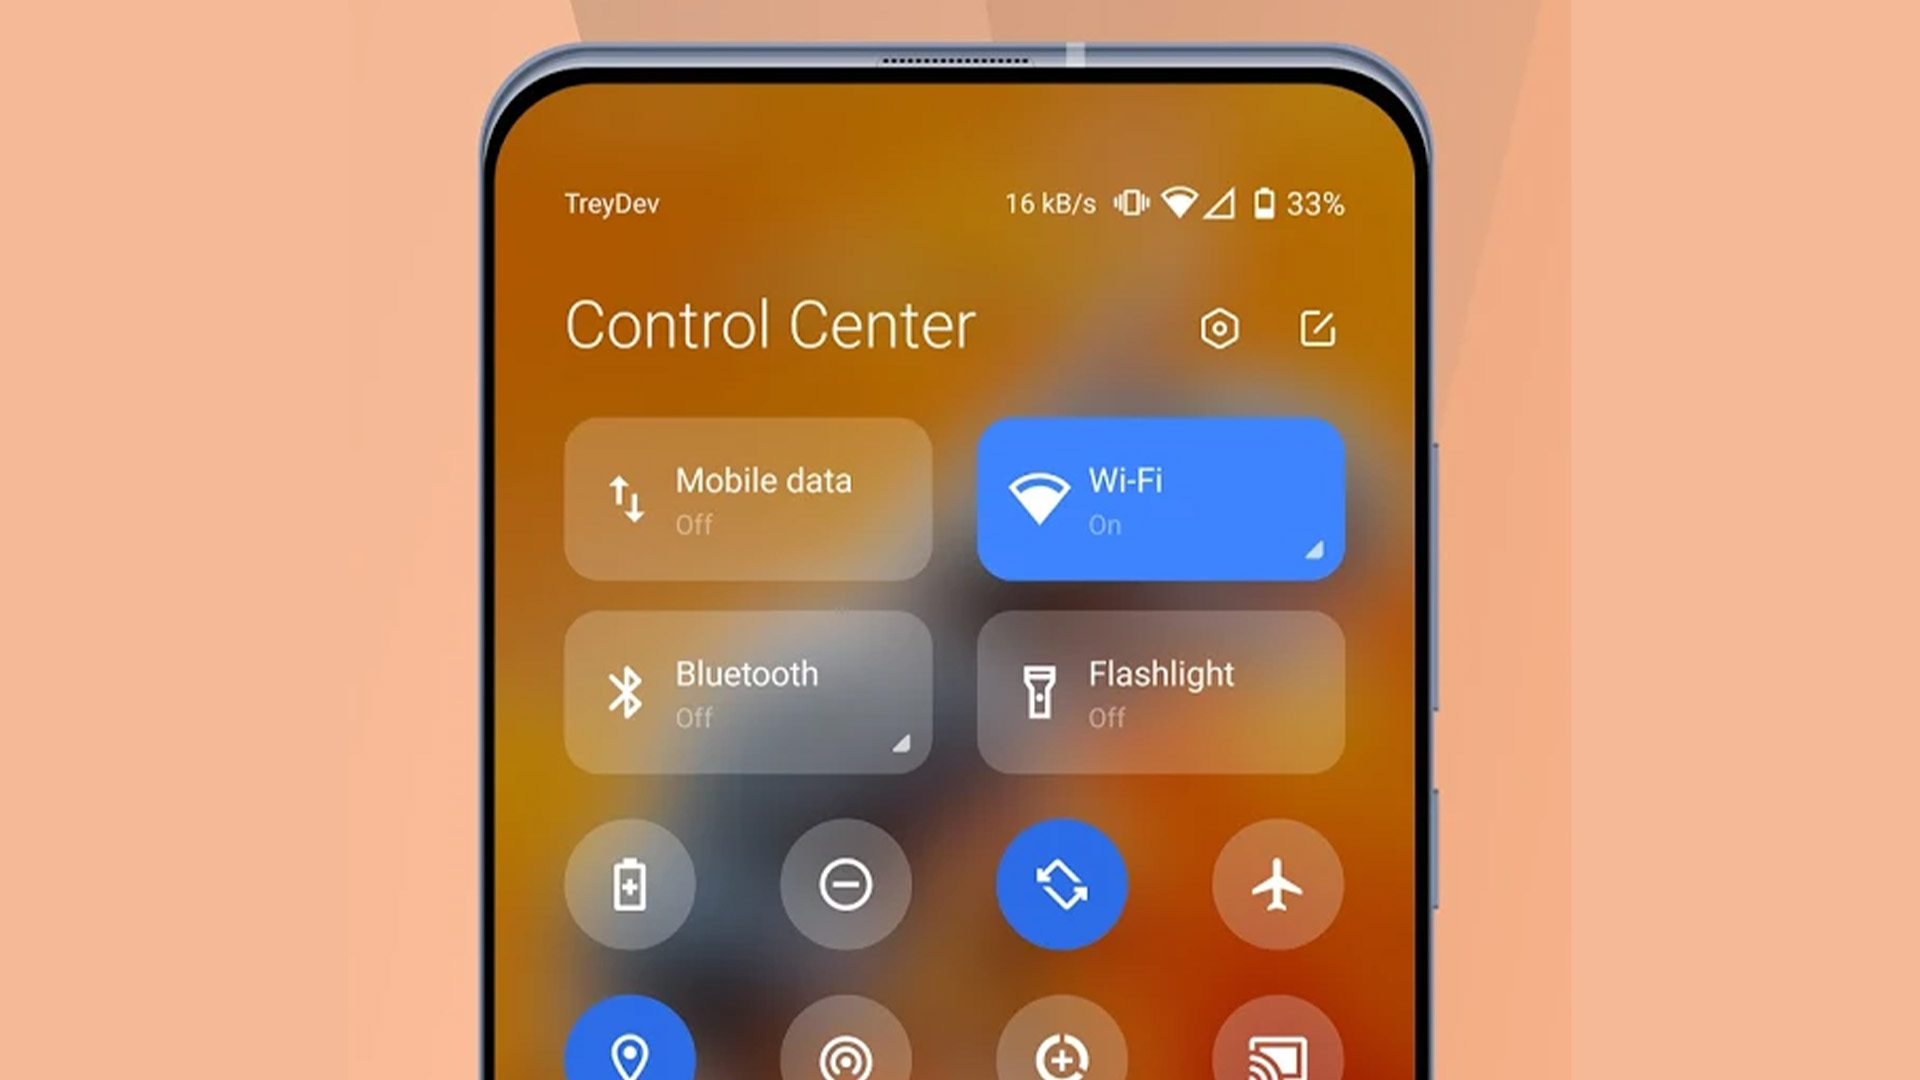 Android Apps Weekly - Mi Control Center